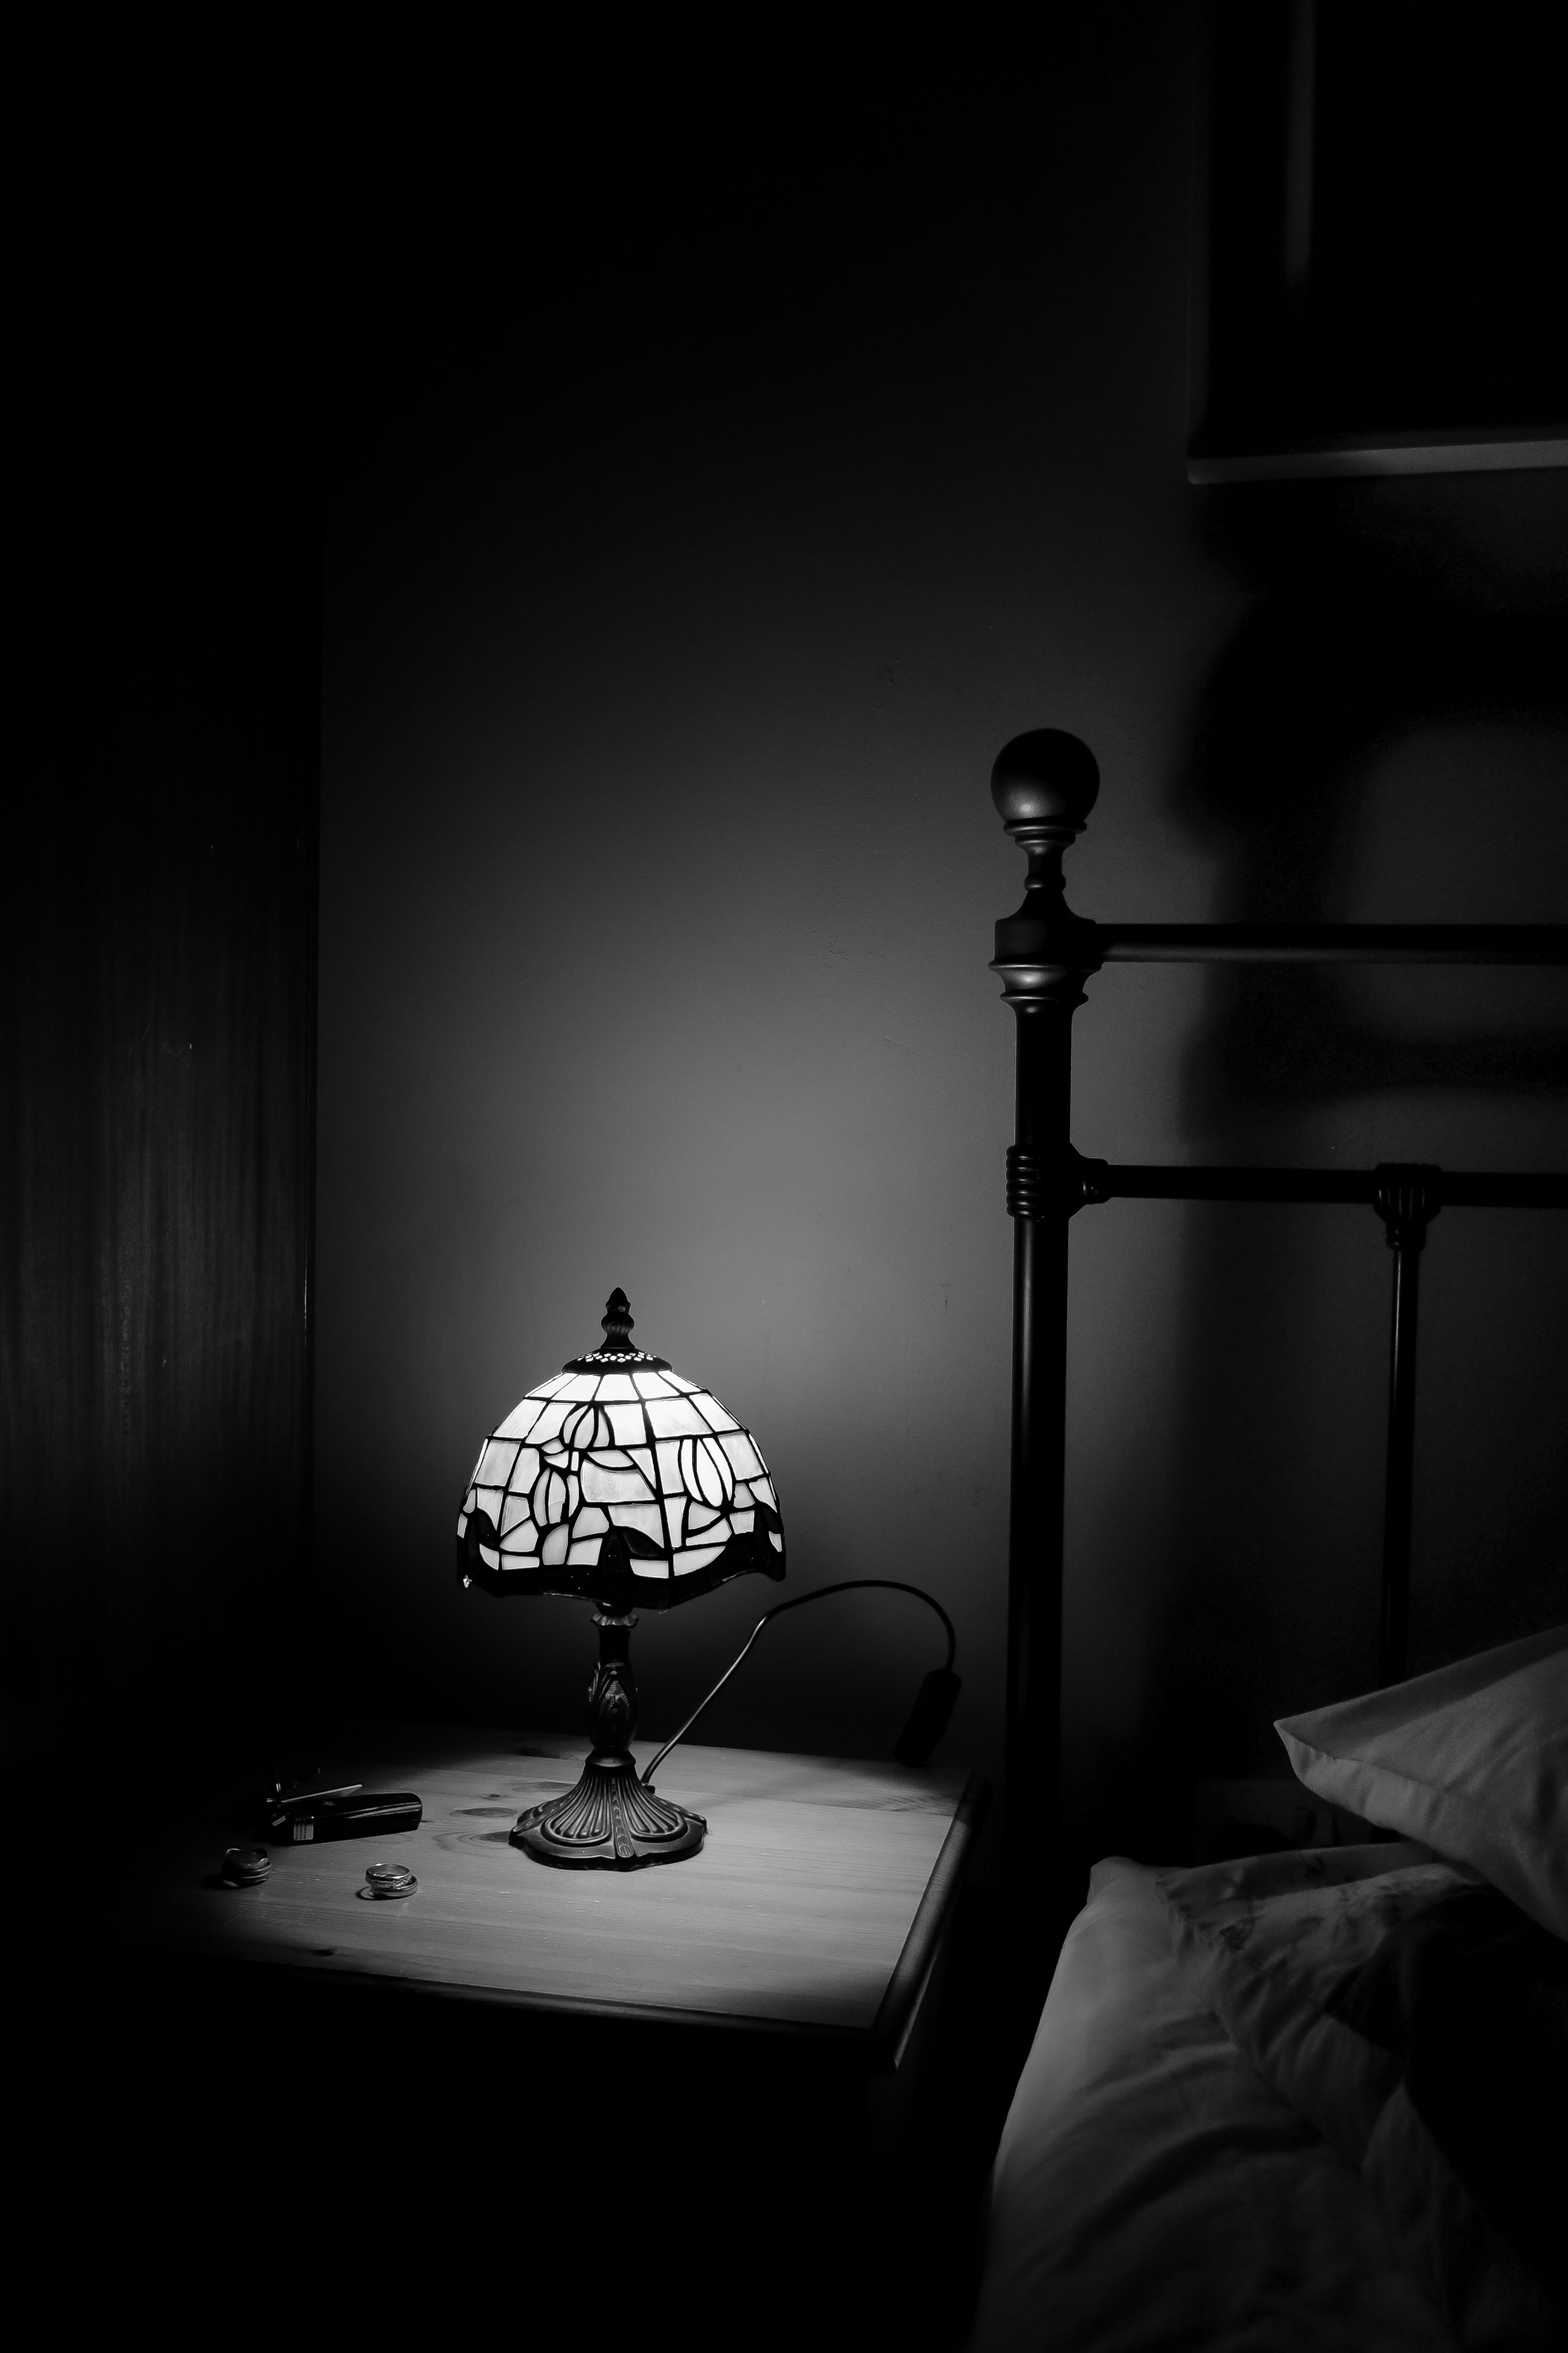 I Remember the Bedroom by Cristina Discusar